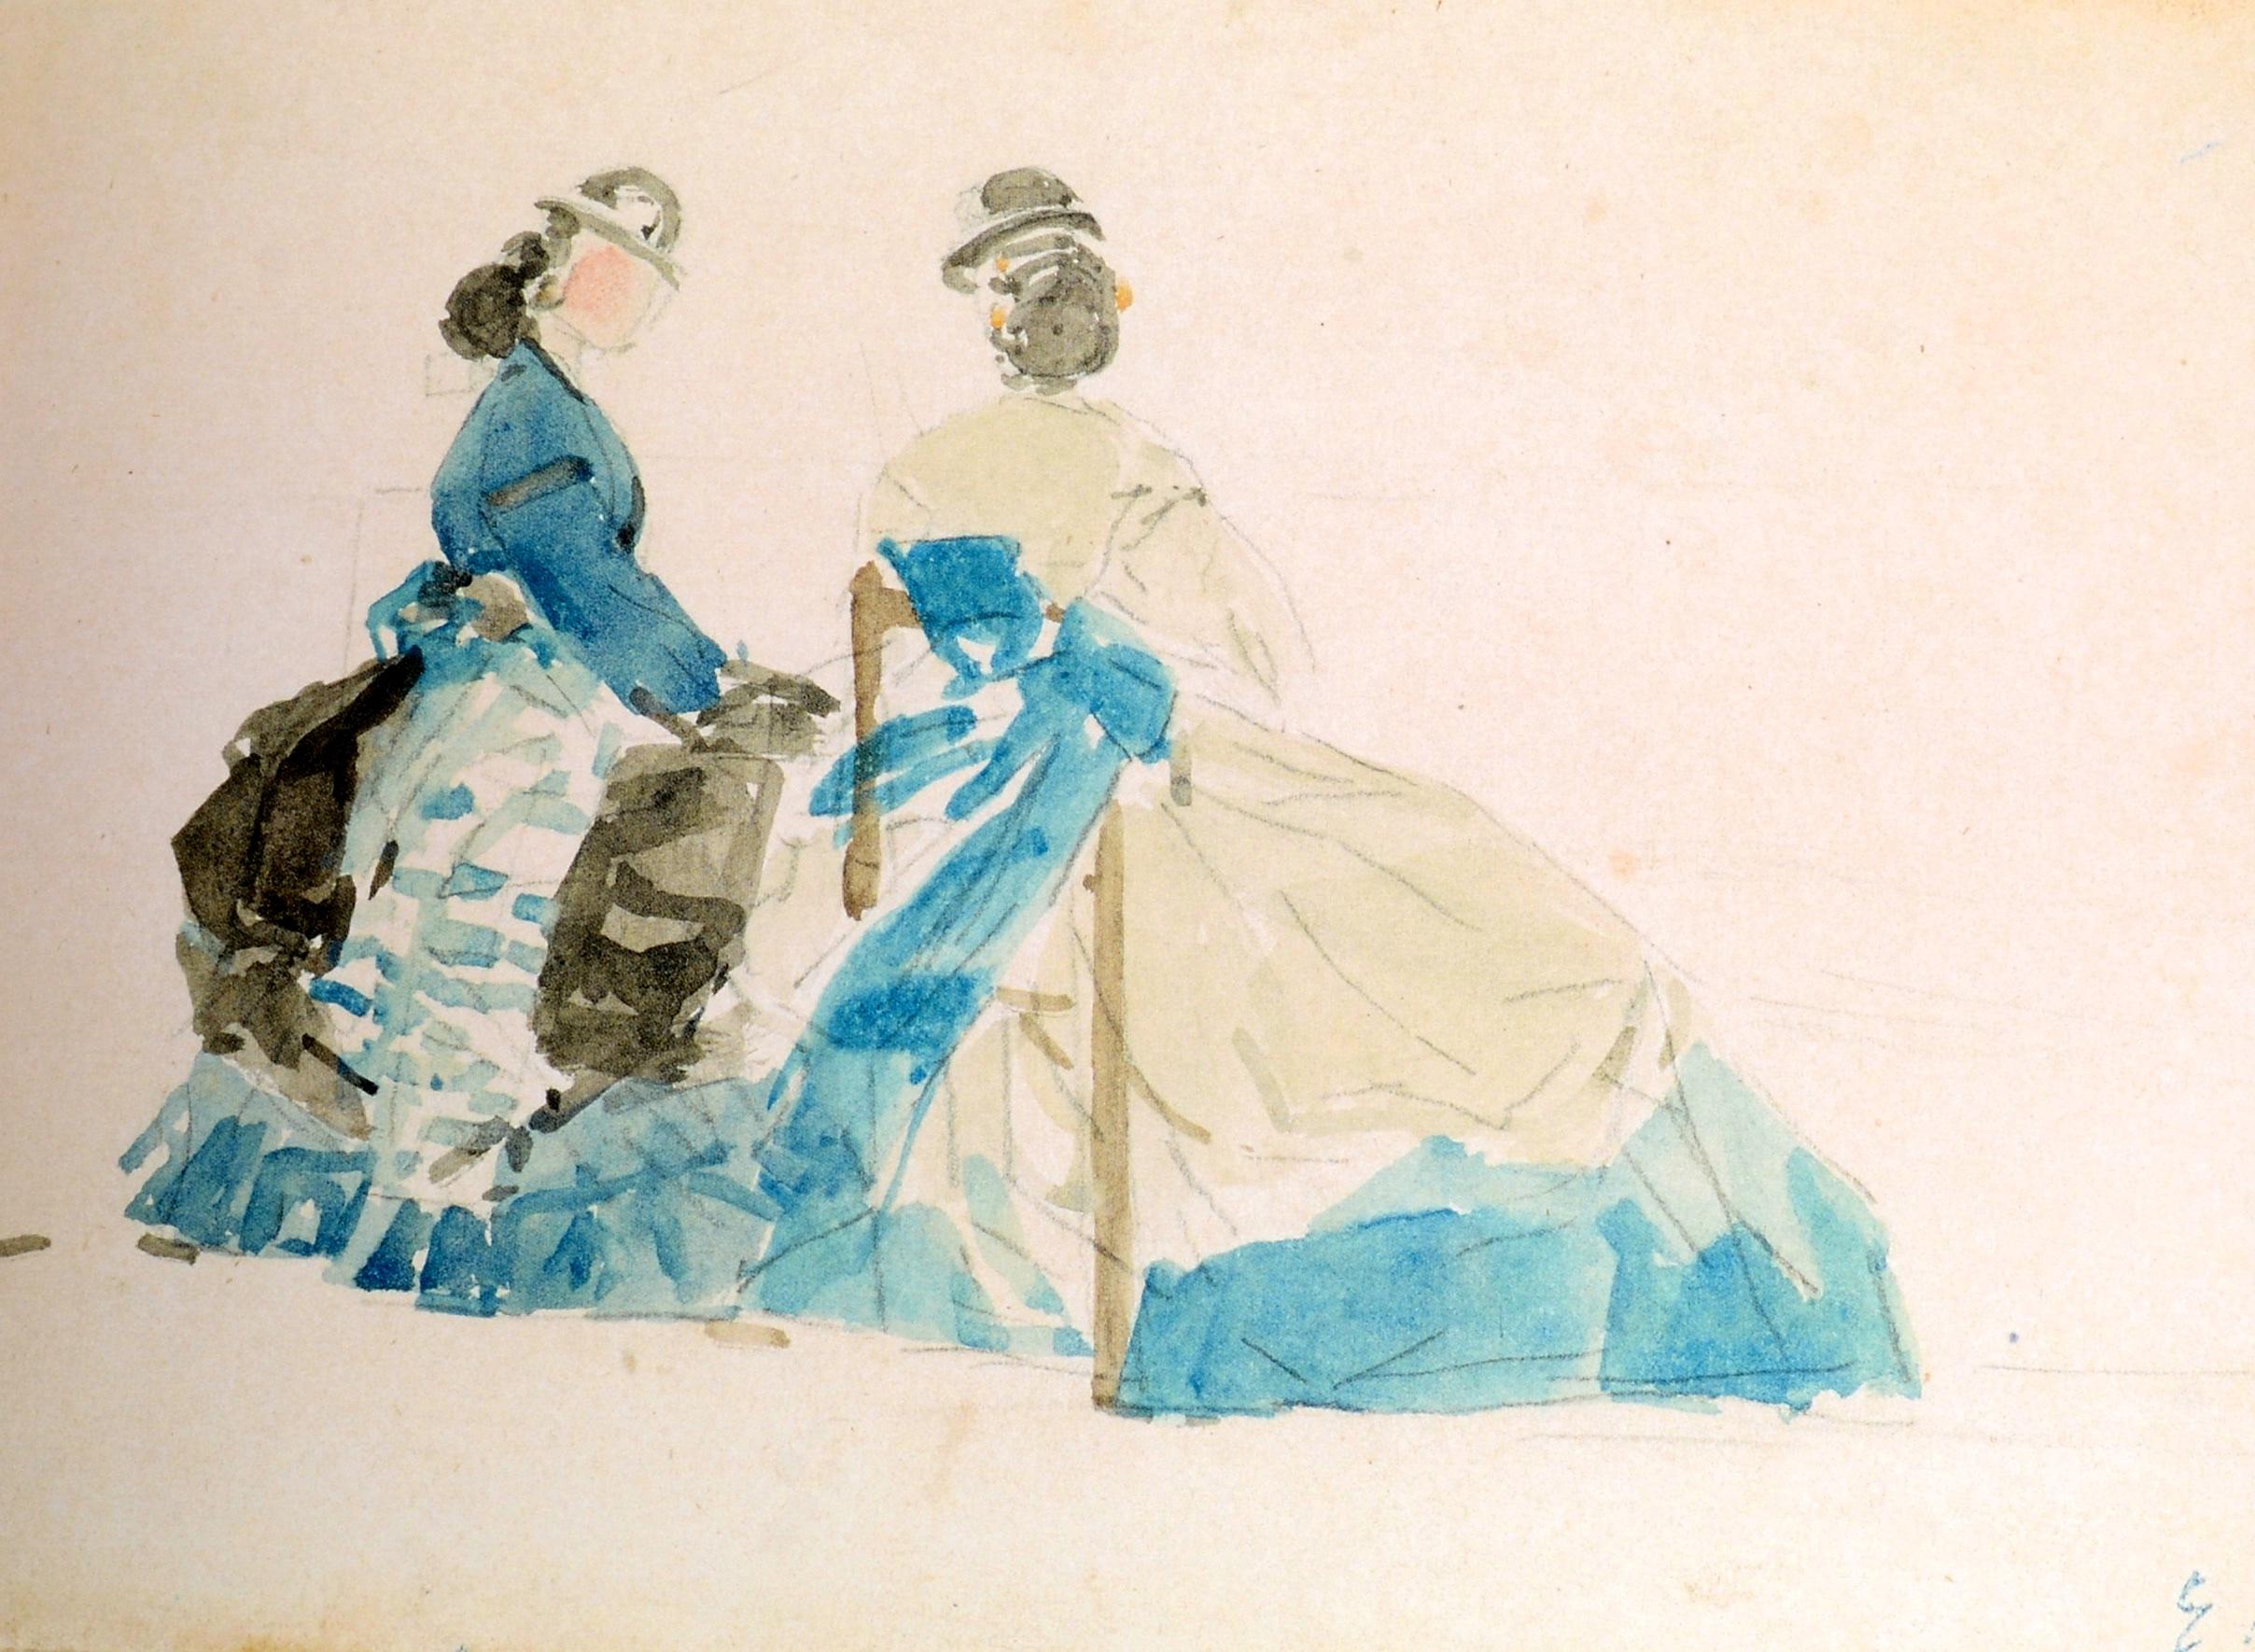 Drawn to Greatness: Master Drawings from the Thaw Collection de Pierpont Morgan en vente 10